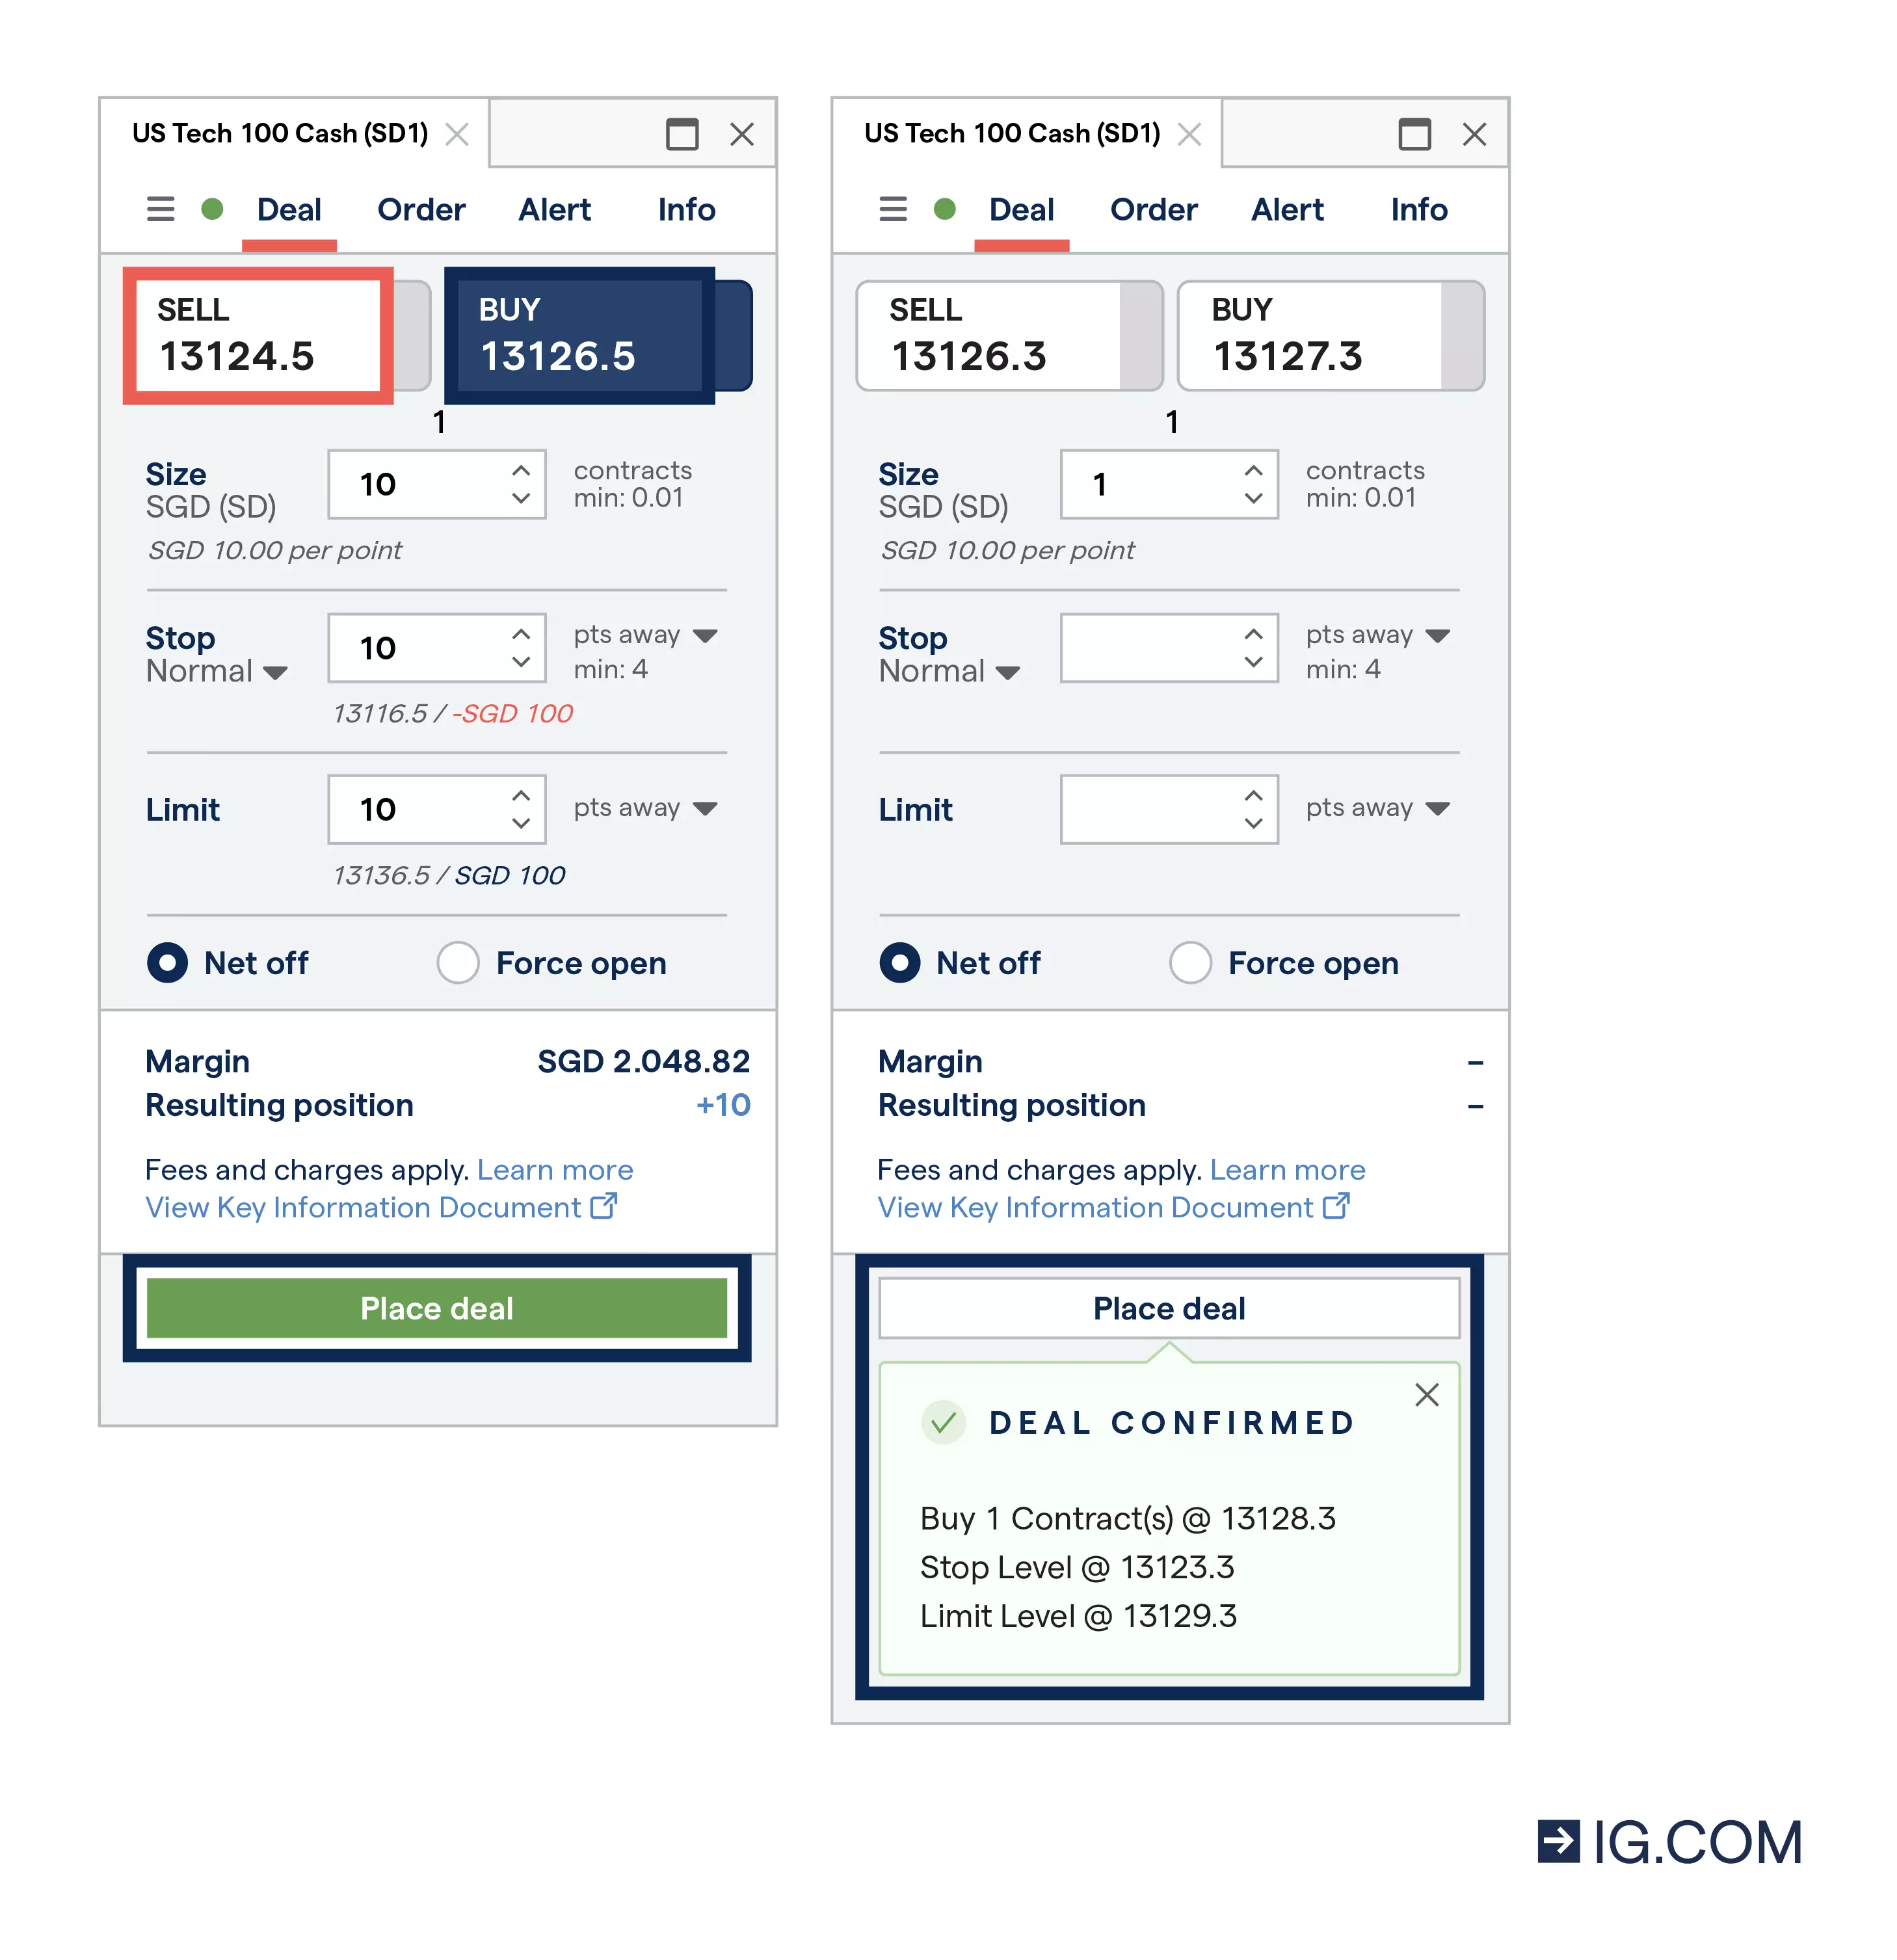 Two screenshots of the IG platform deal ticket showing how to place a trade and what it looks like when the deal is confirmed.